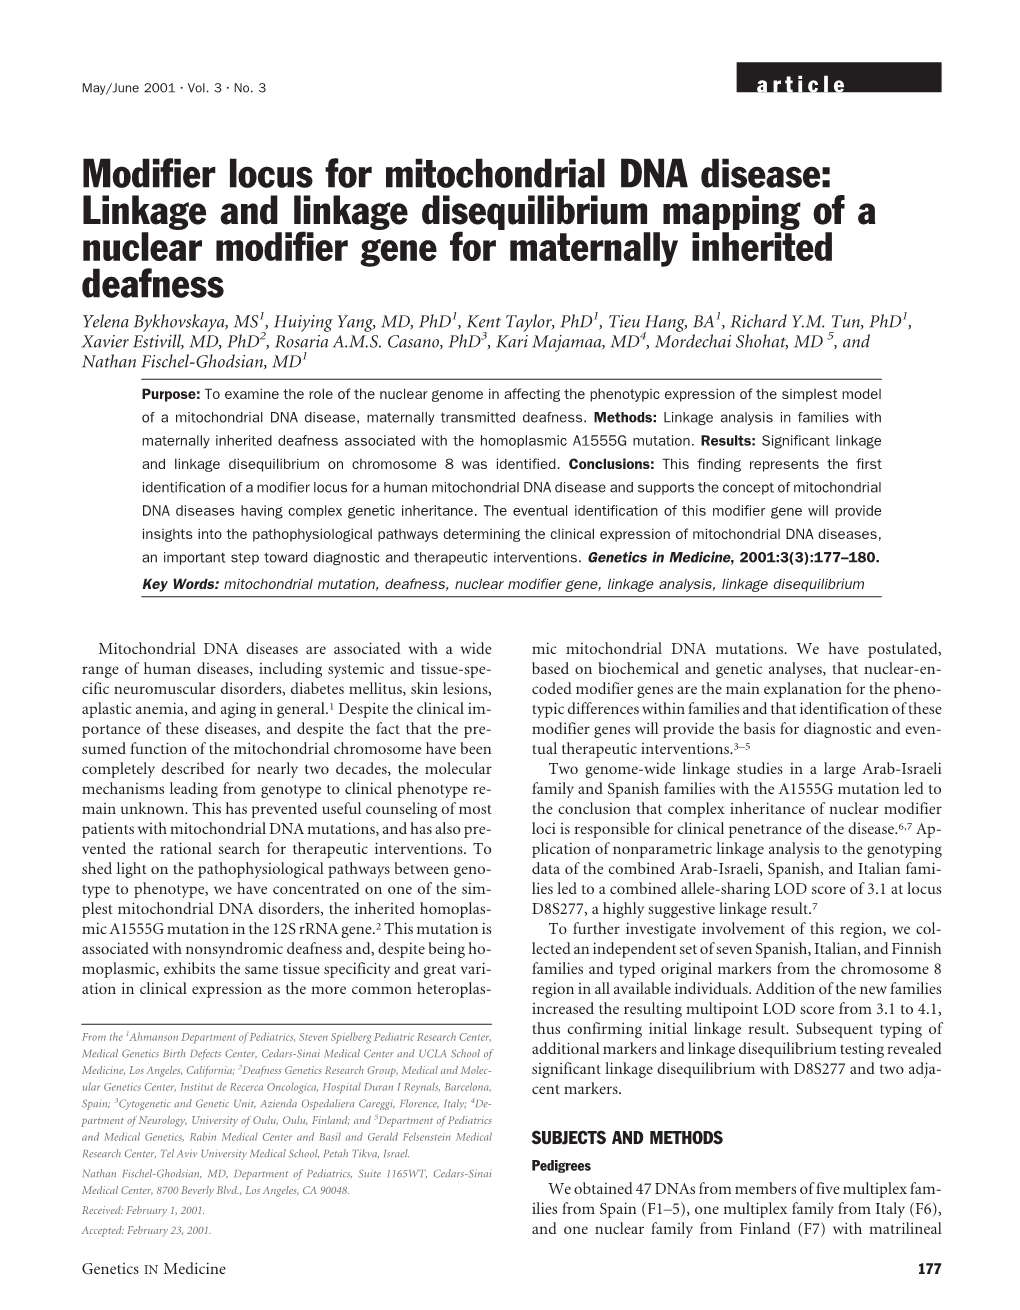 Modifier Locus for Mitochondrial DNA Disease